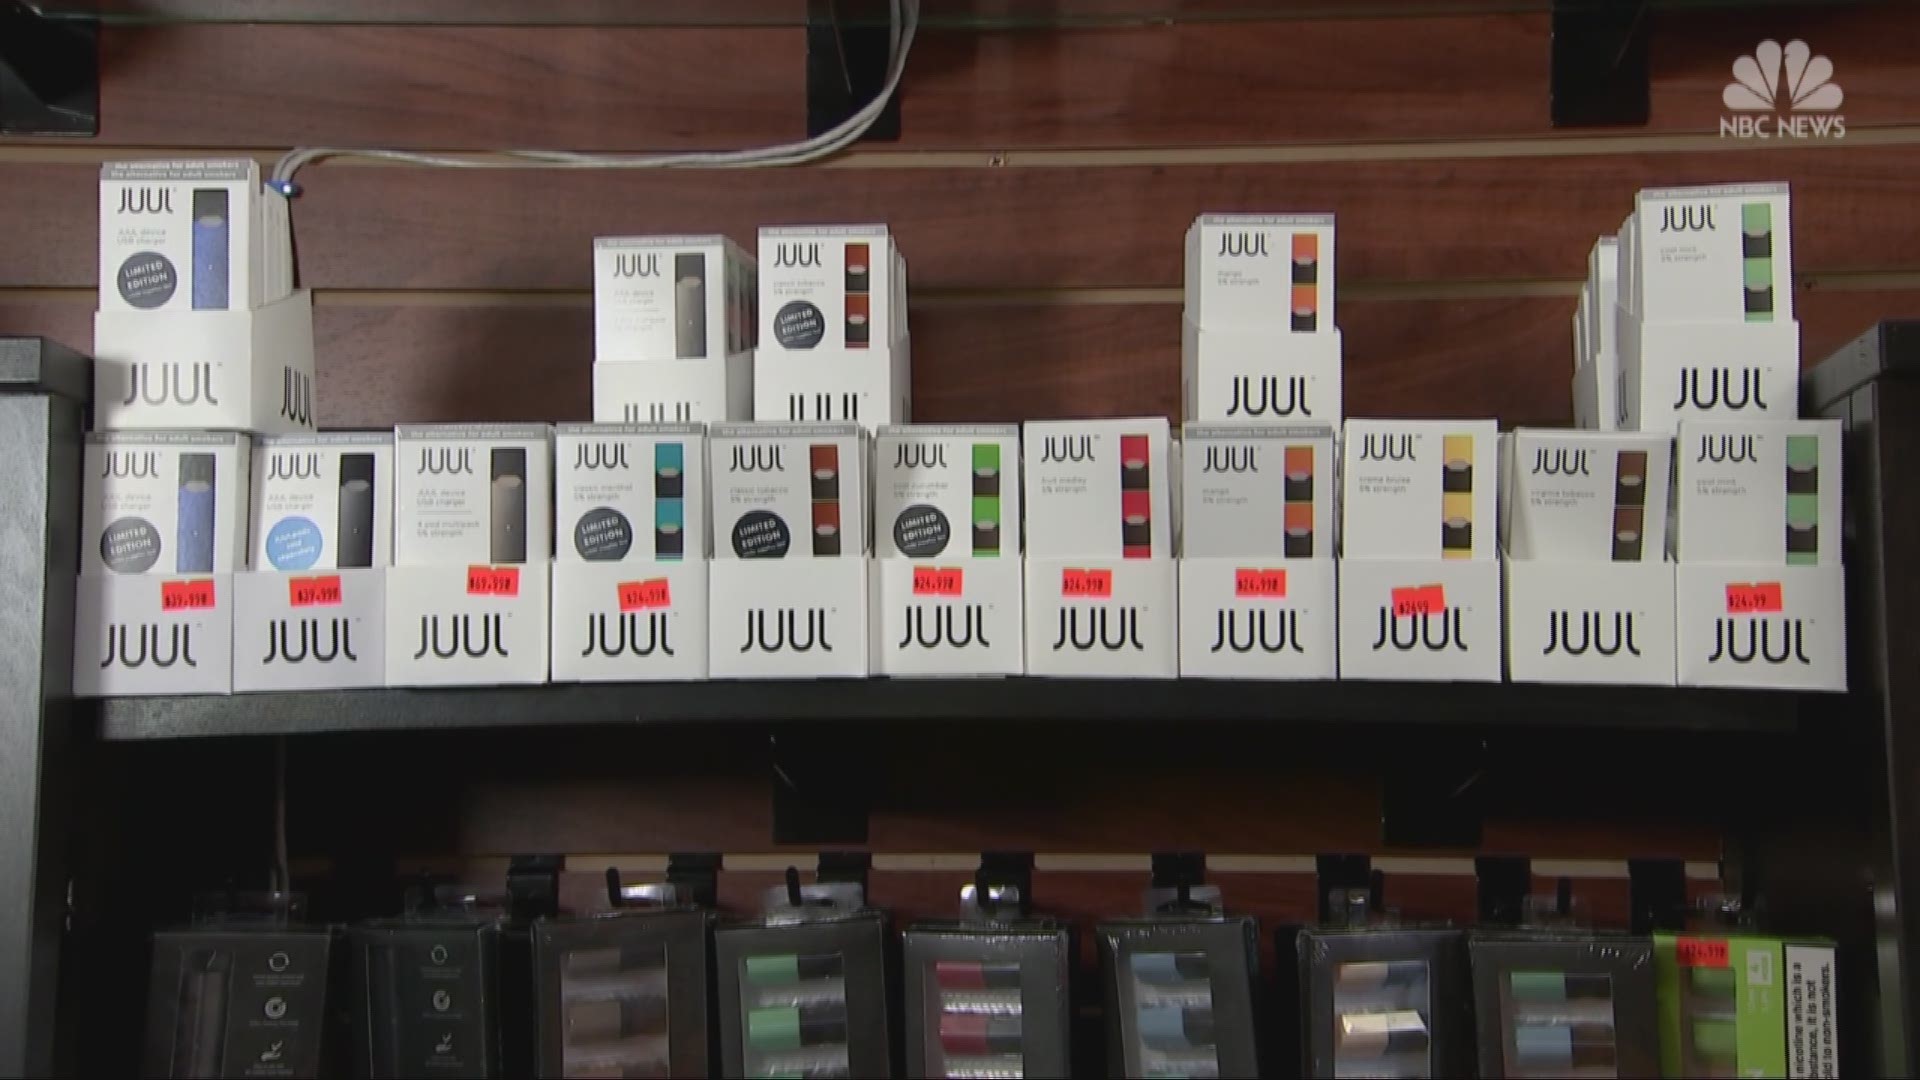 They're sleek, secretive and have the potential to get kids hooked. Juul pods are electronic cigarettes that contain the equivalent of a pack of cigarettes, but many teens don't know the products always contain nicotine. Erika Edwards reports.